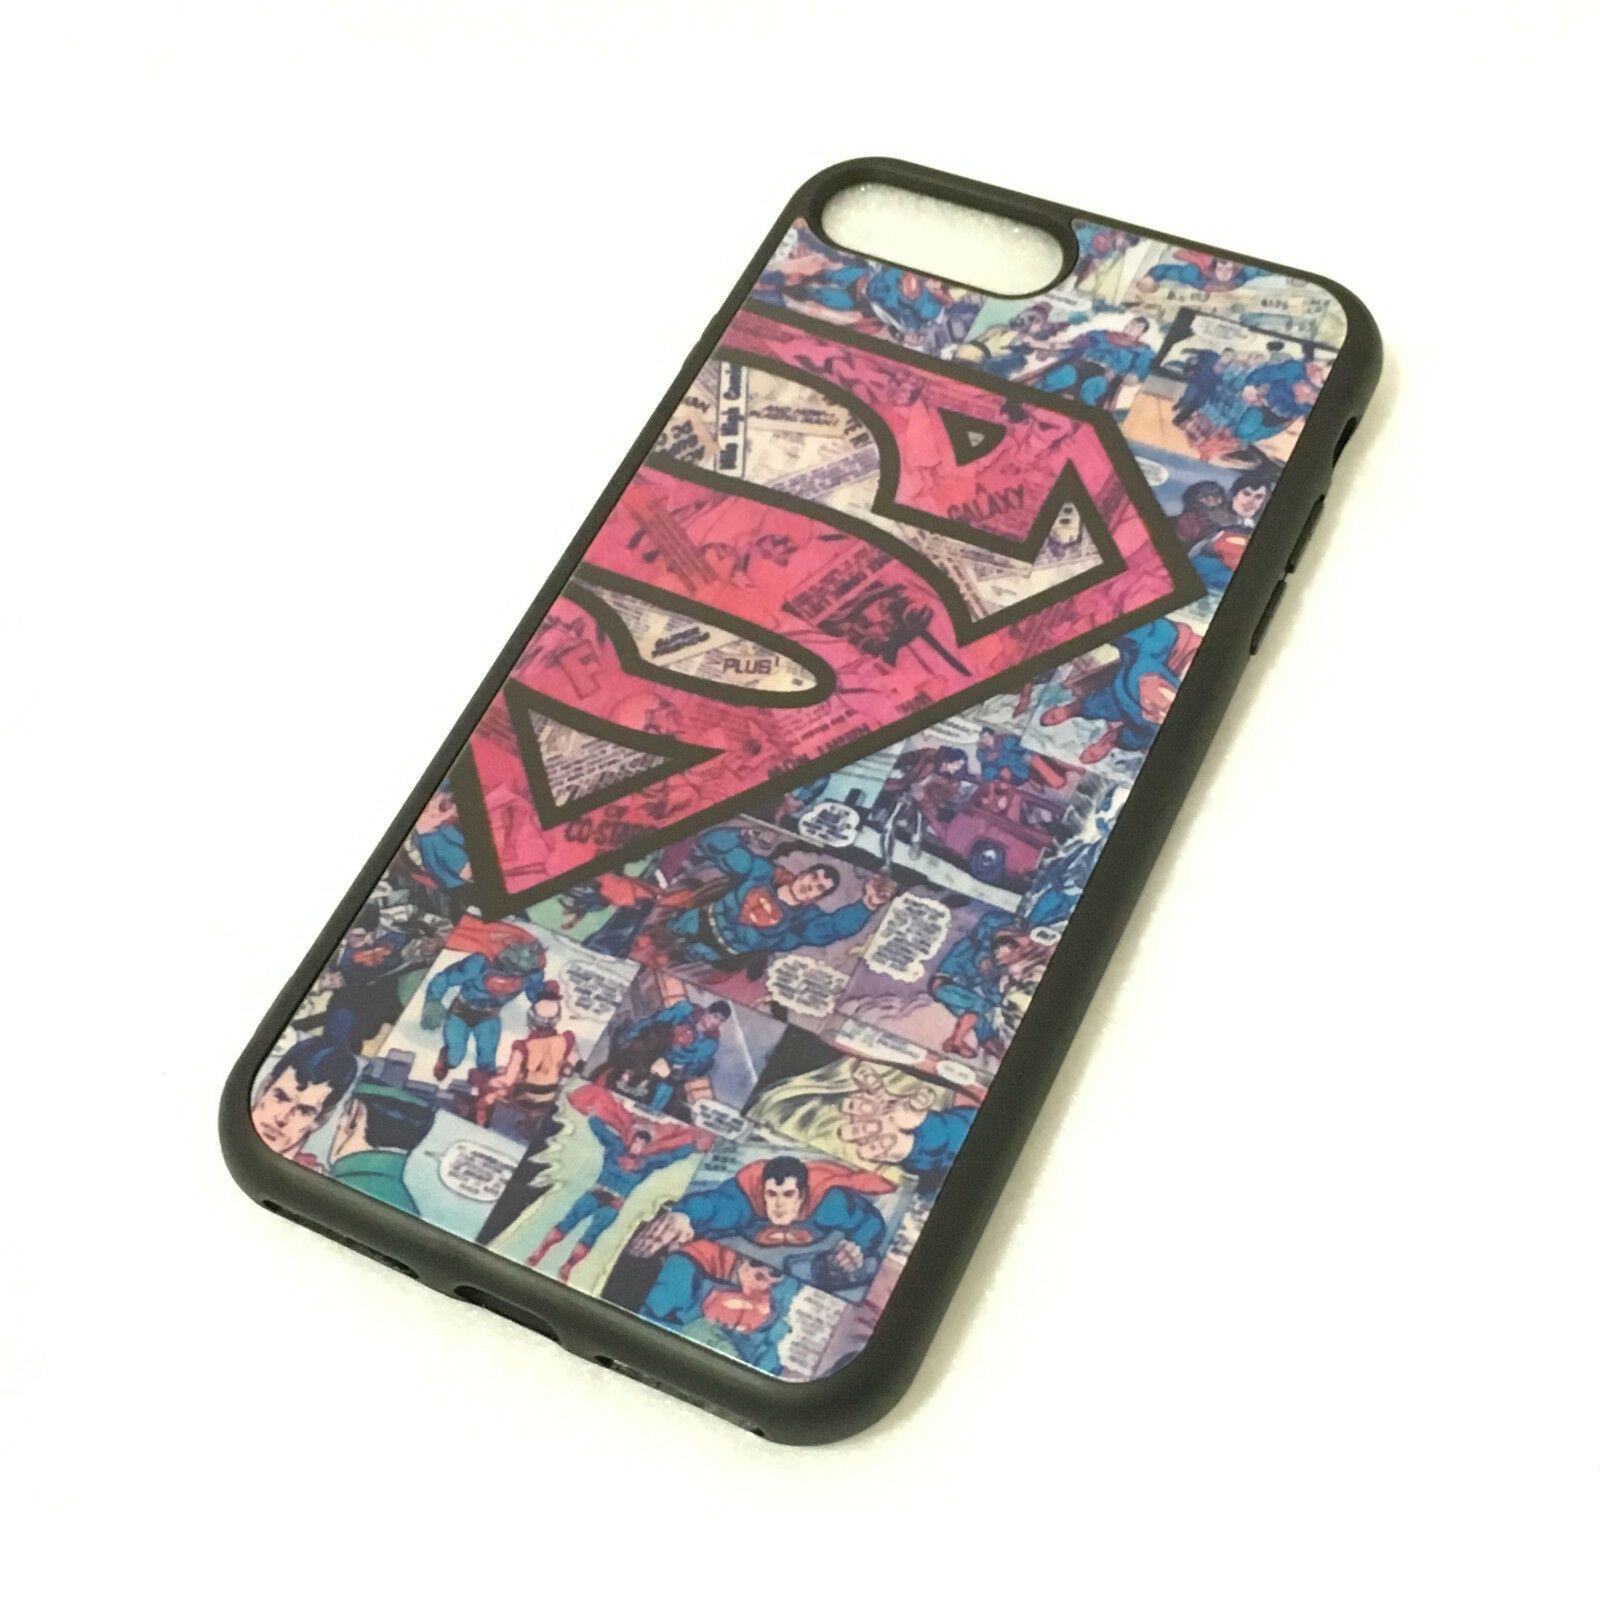 for iPhone 7+ / 8+ PLUS -Hard TPU Rubber Case Cover Red Blue Superman Comic Book iPhone Cases AtlasCase 